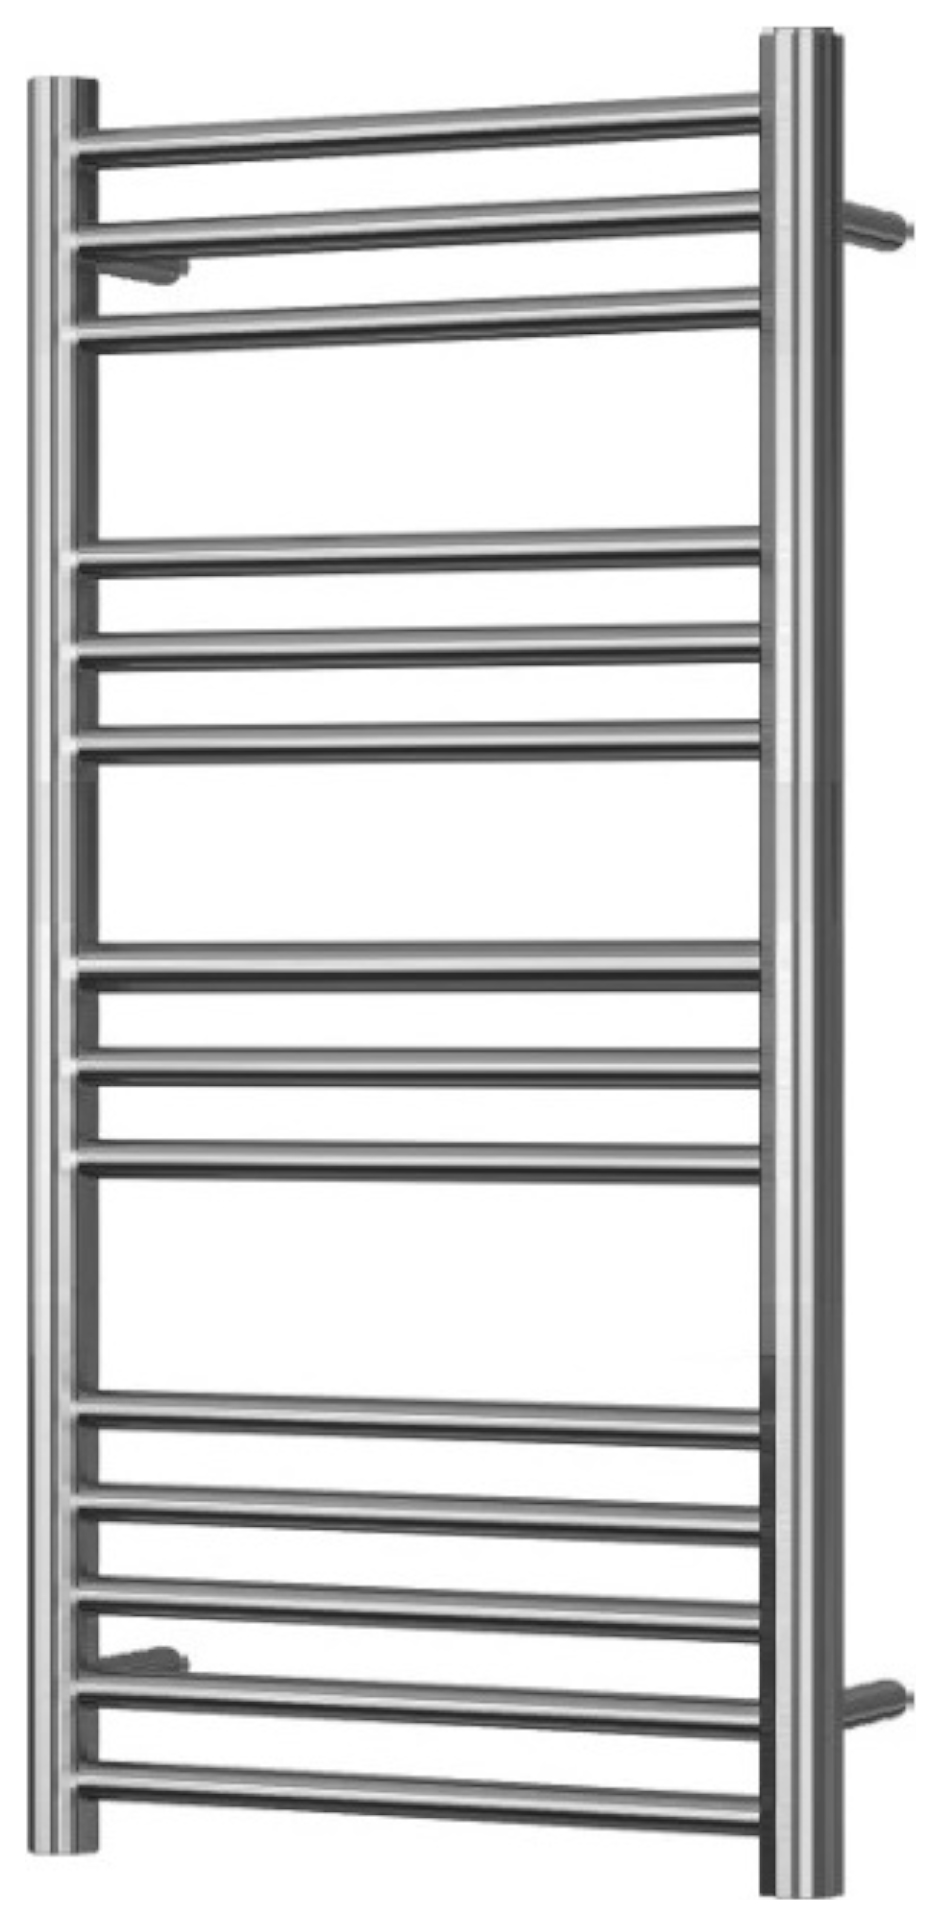 Image of Towelrads Eversley Polished Stainless Towel Radiator - 1000 x 600mm